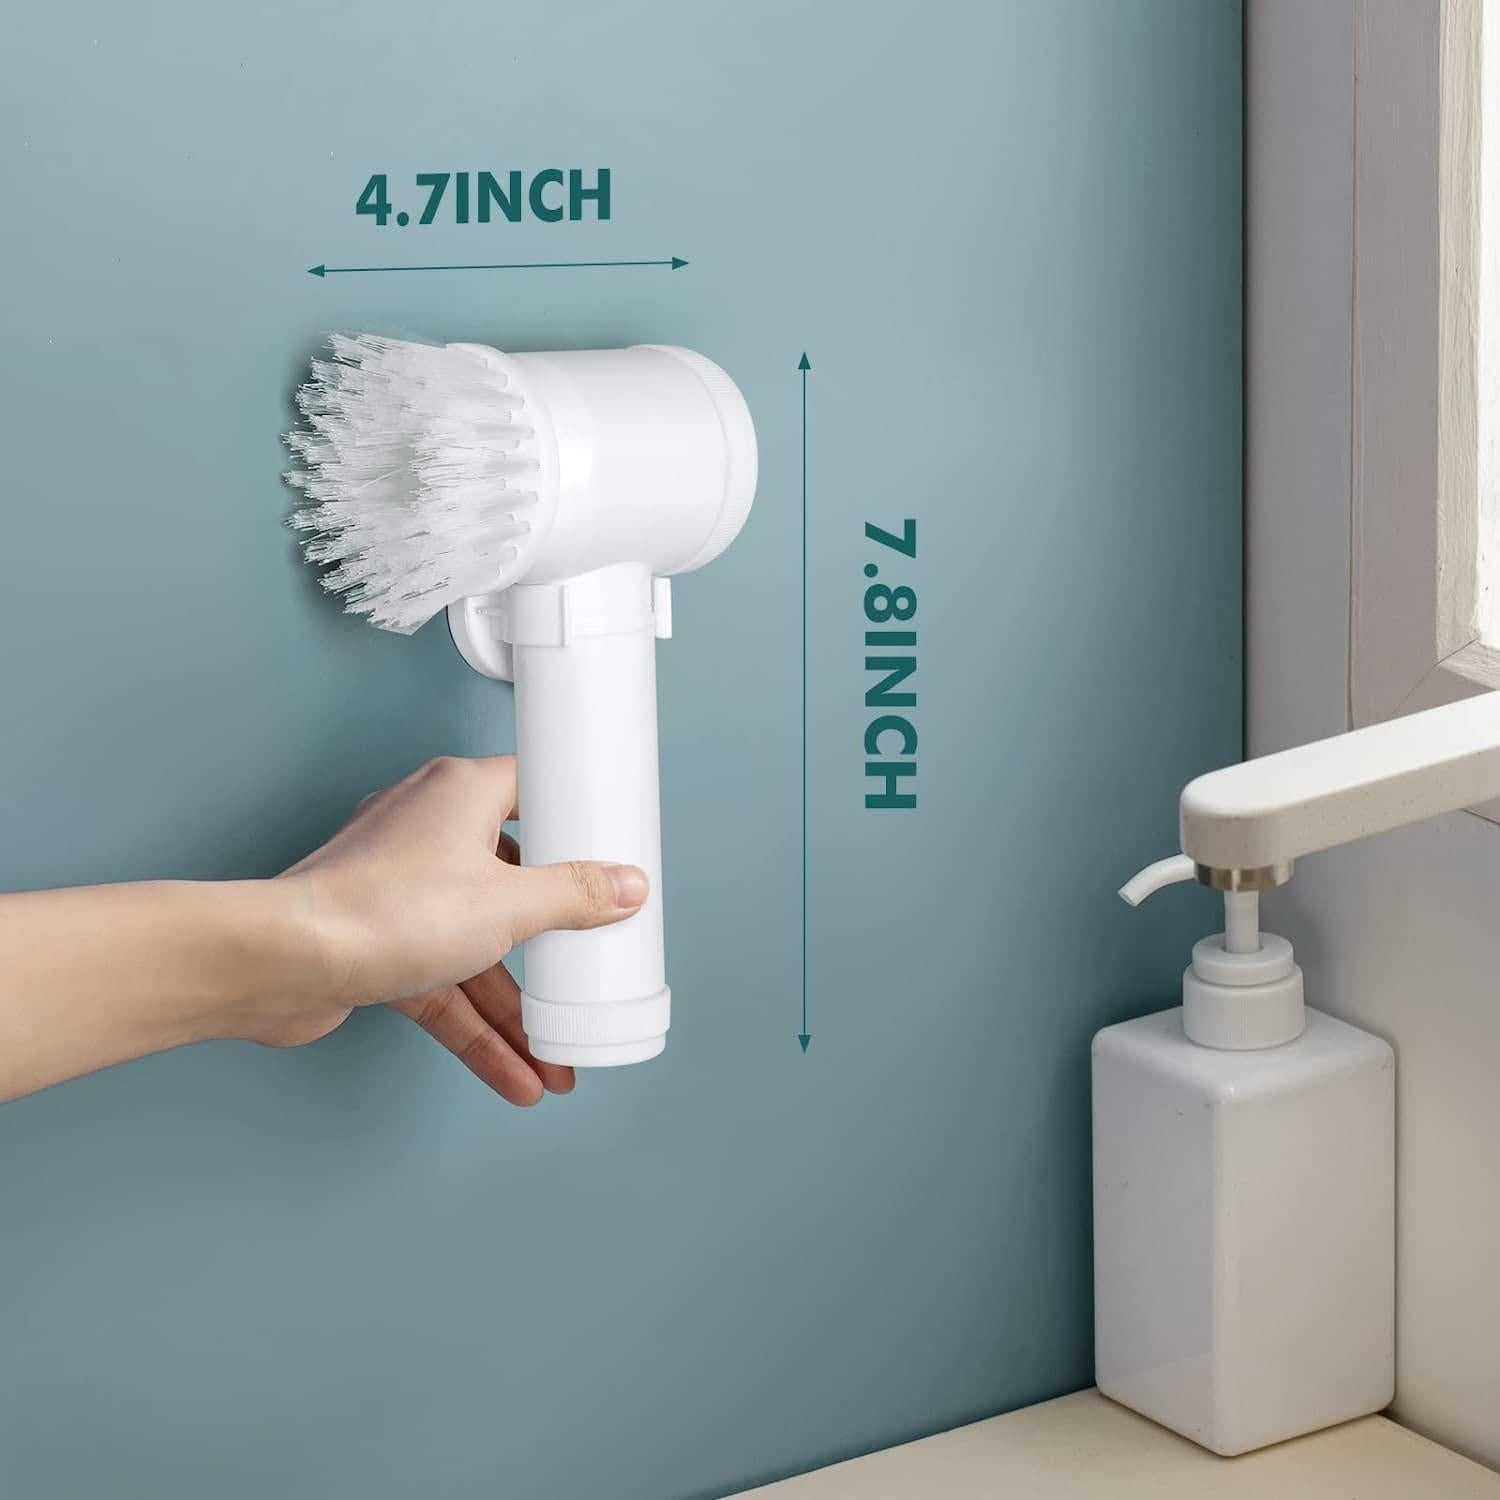 5 in 1 Handheld Bathroom Cleaning Brush 50% OFF TODAY🔥